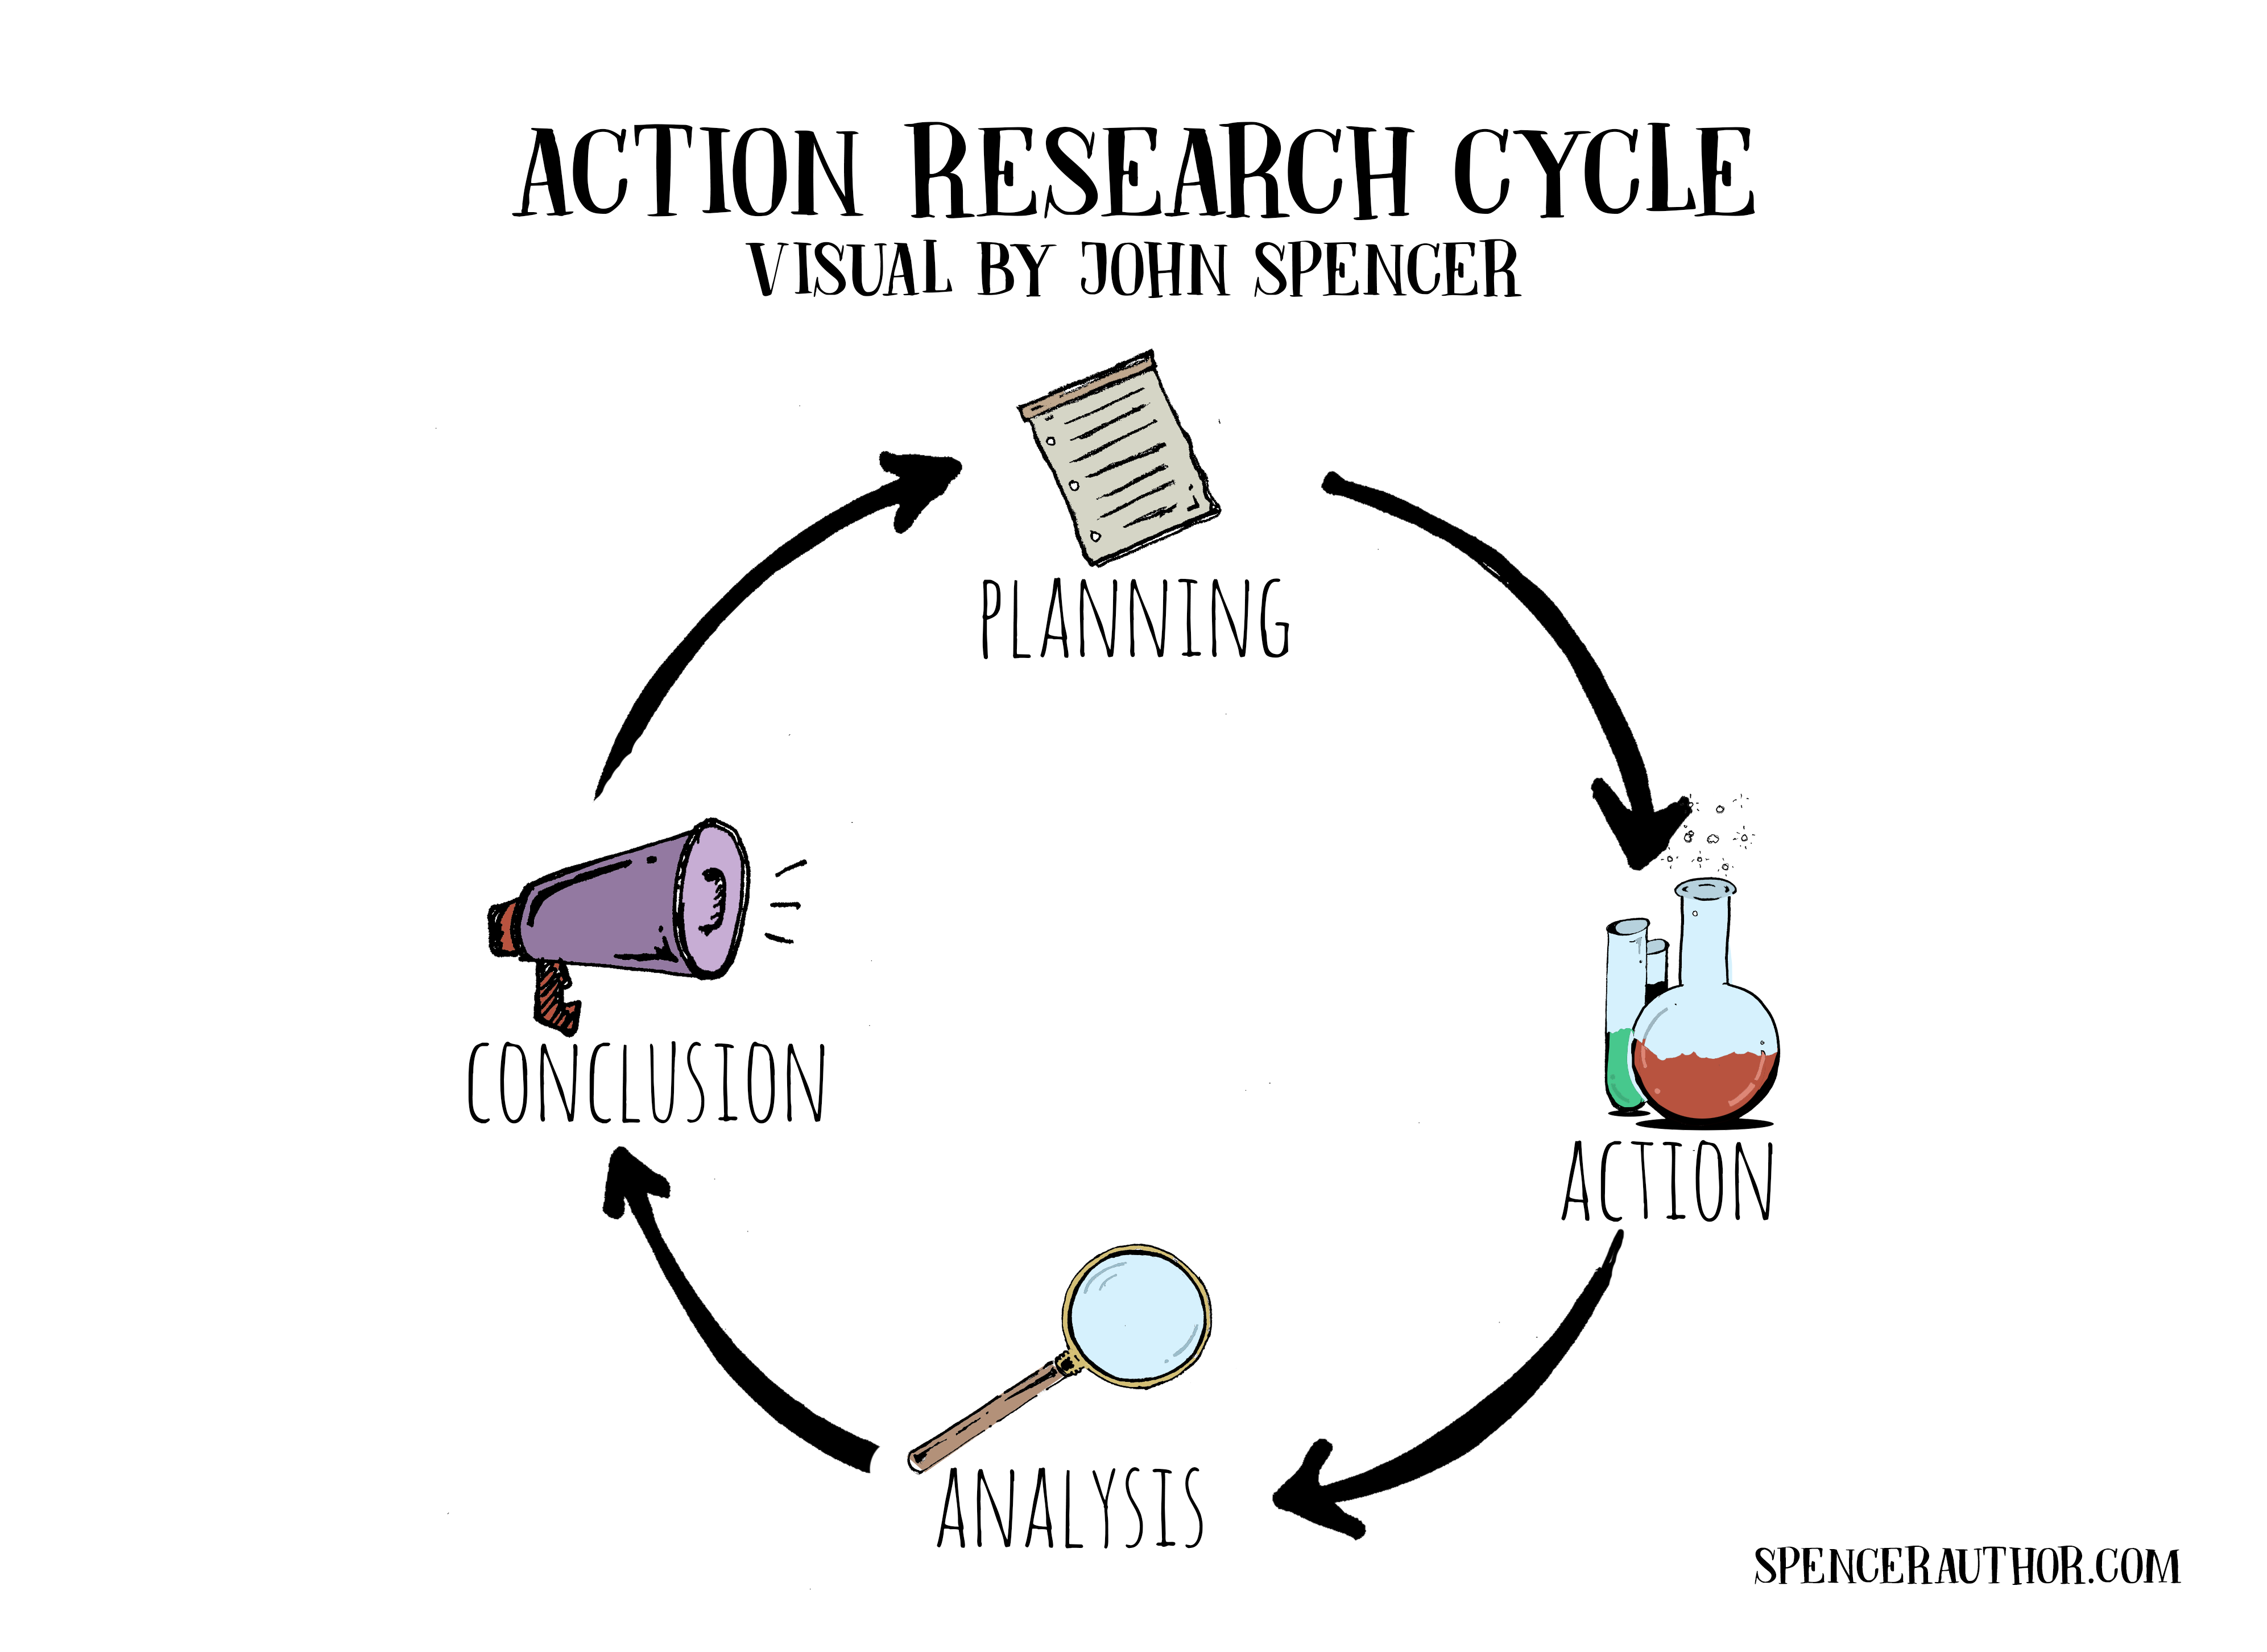 action research vs case report